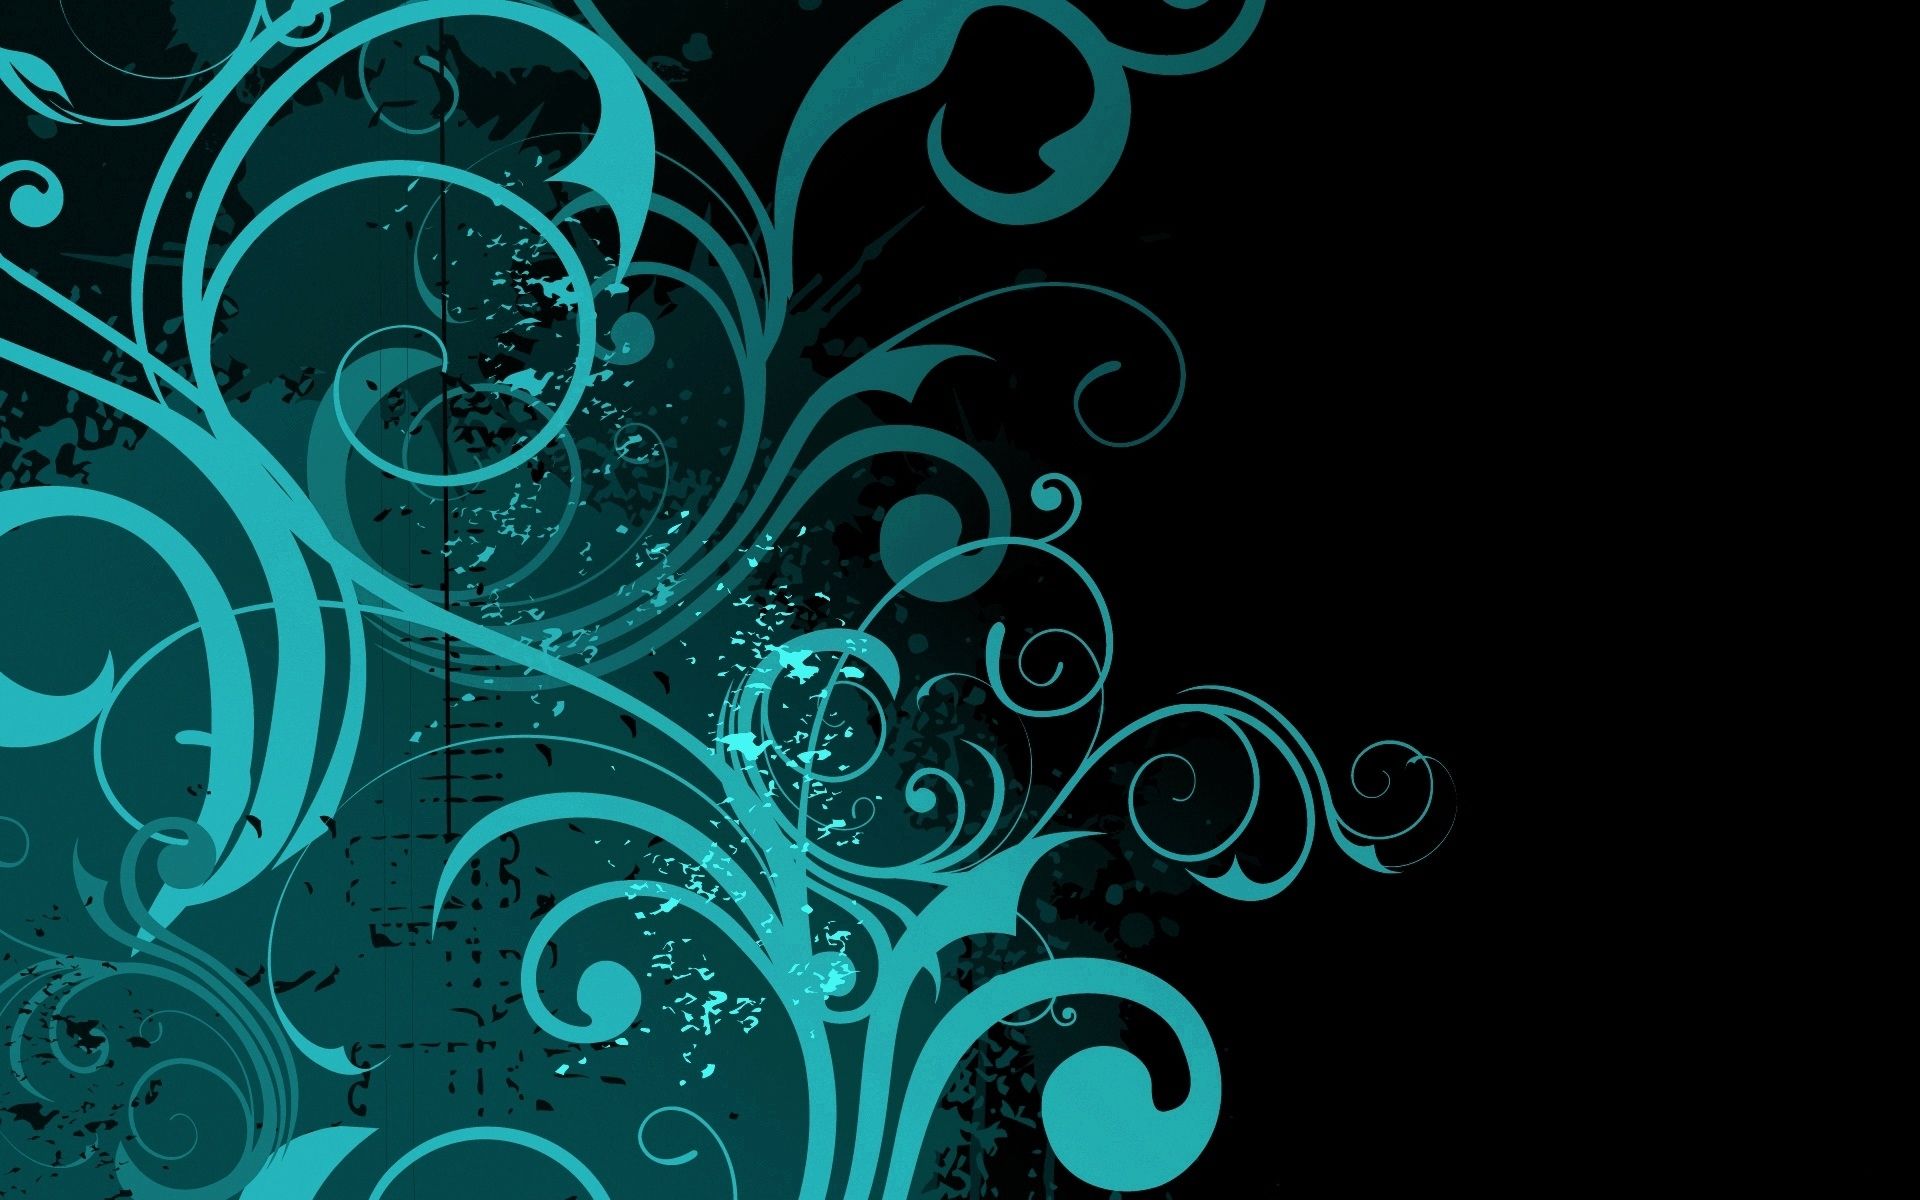 The colorful swirl HD abstract wallpaper. Black wallpaper